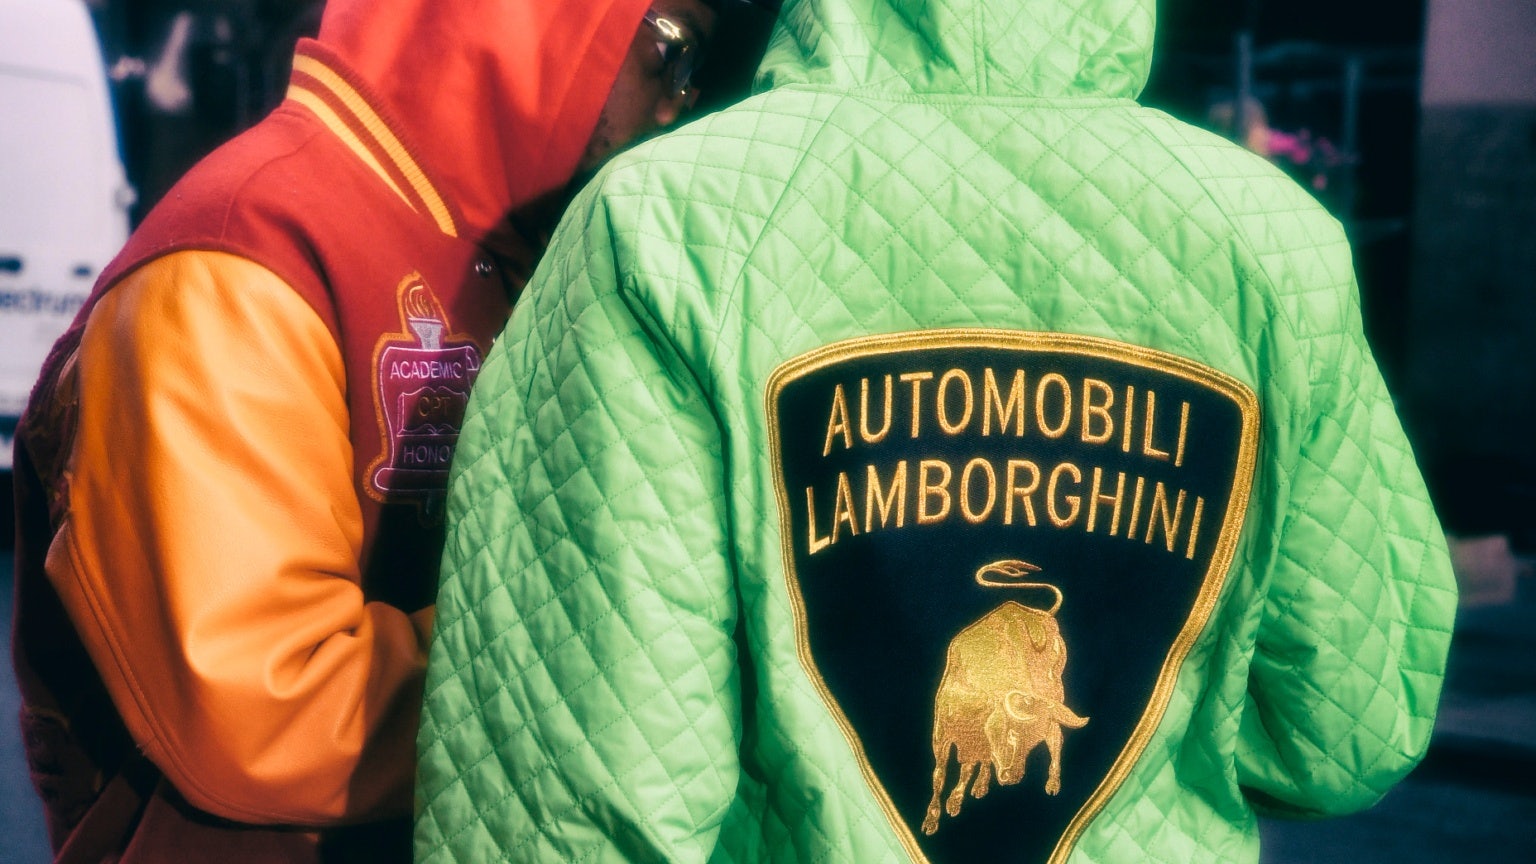 The global consultancy Bain & Co. and Tmall recently co-released a new luxury report on China that further validates the market’s post-COVID-19 significance. Photo: Lamborghini